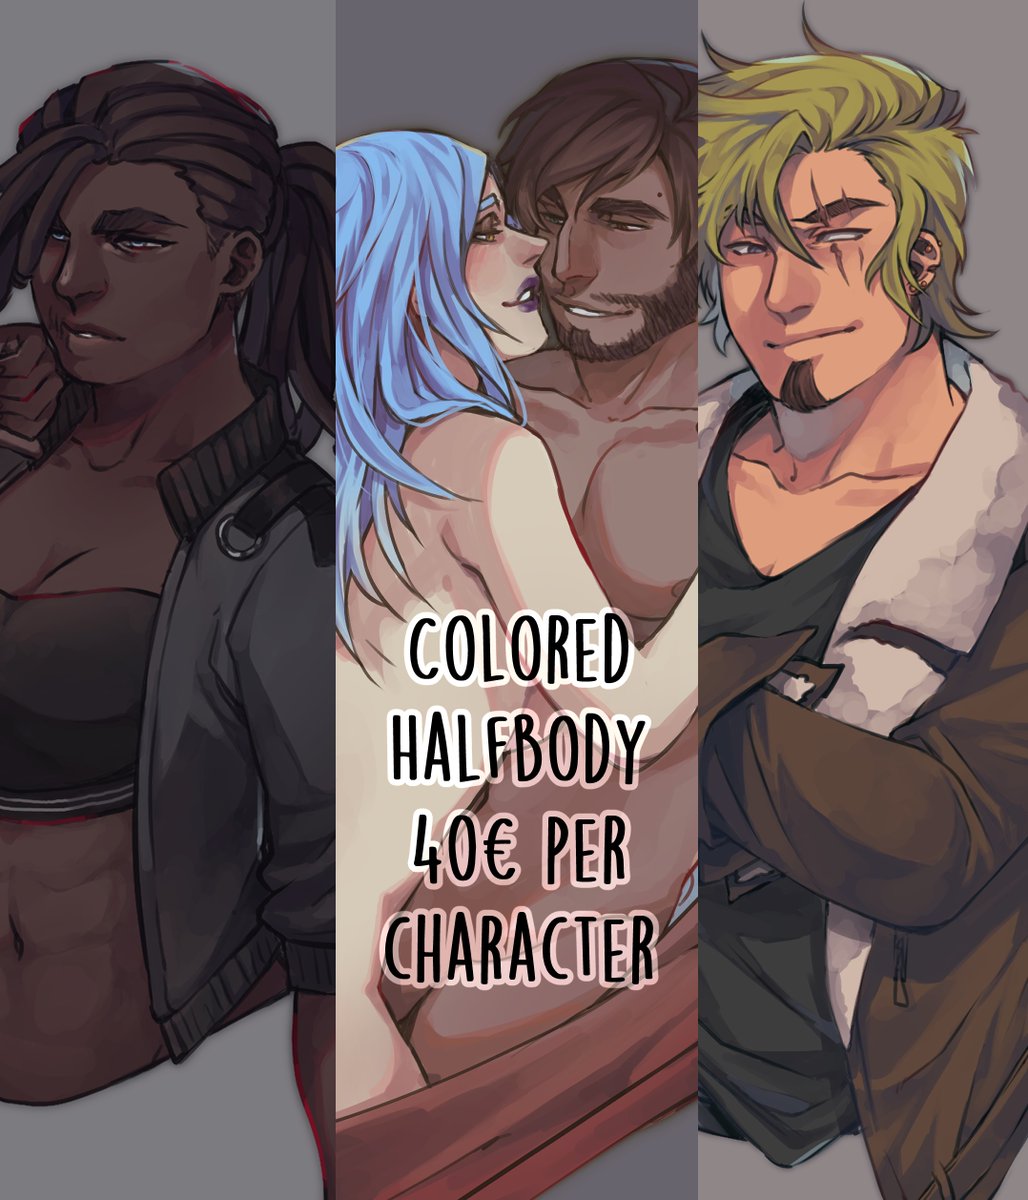 hey there i'm accepting commissions again! :D
please write me a message when you're interested <3 will only accept a limited amount of slots, just so you know

if you have any questions don't be afraid to ask! i draw almost everything except too heavy detailed characters 